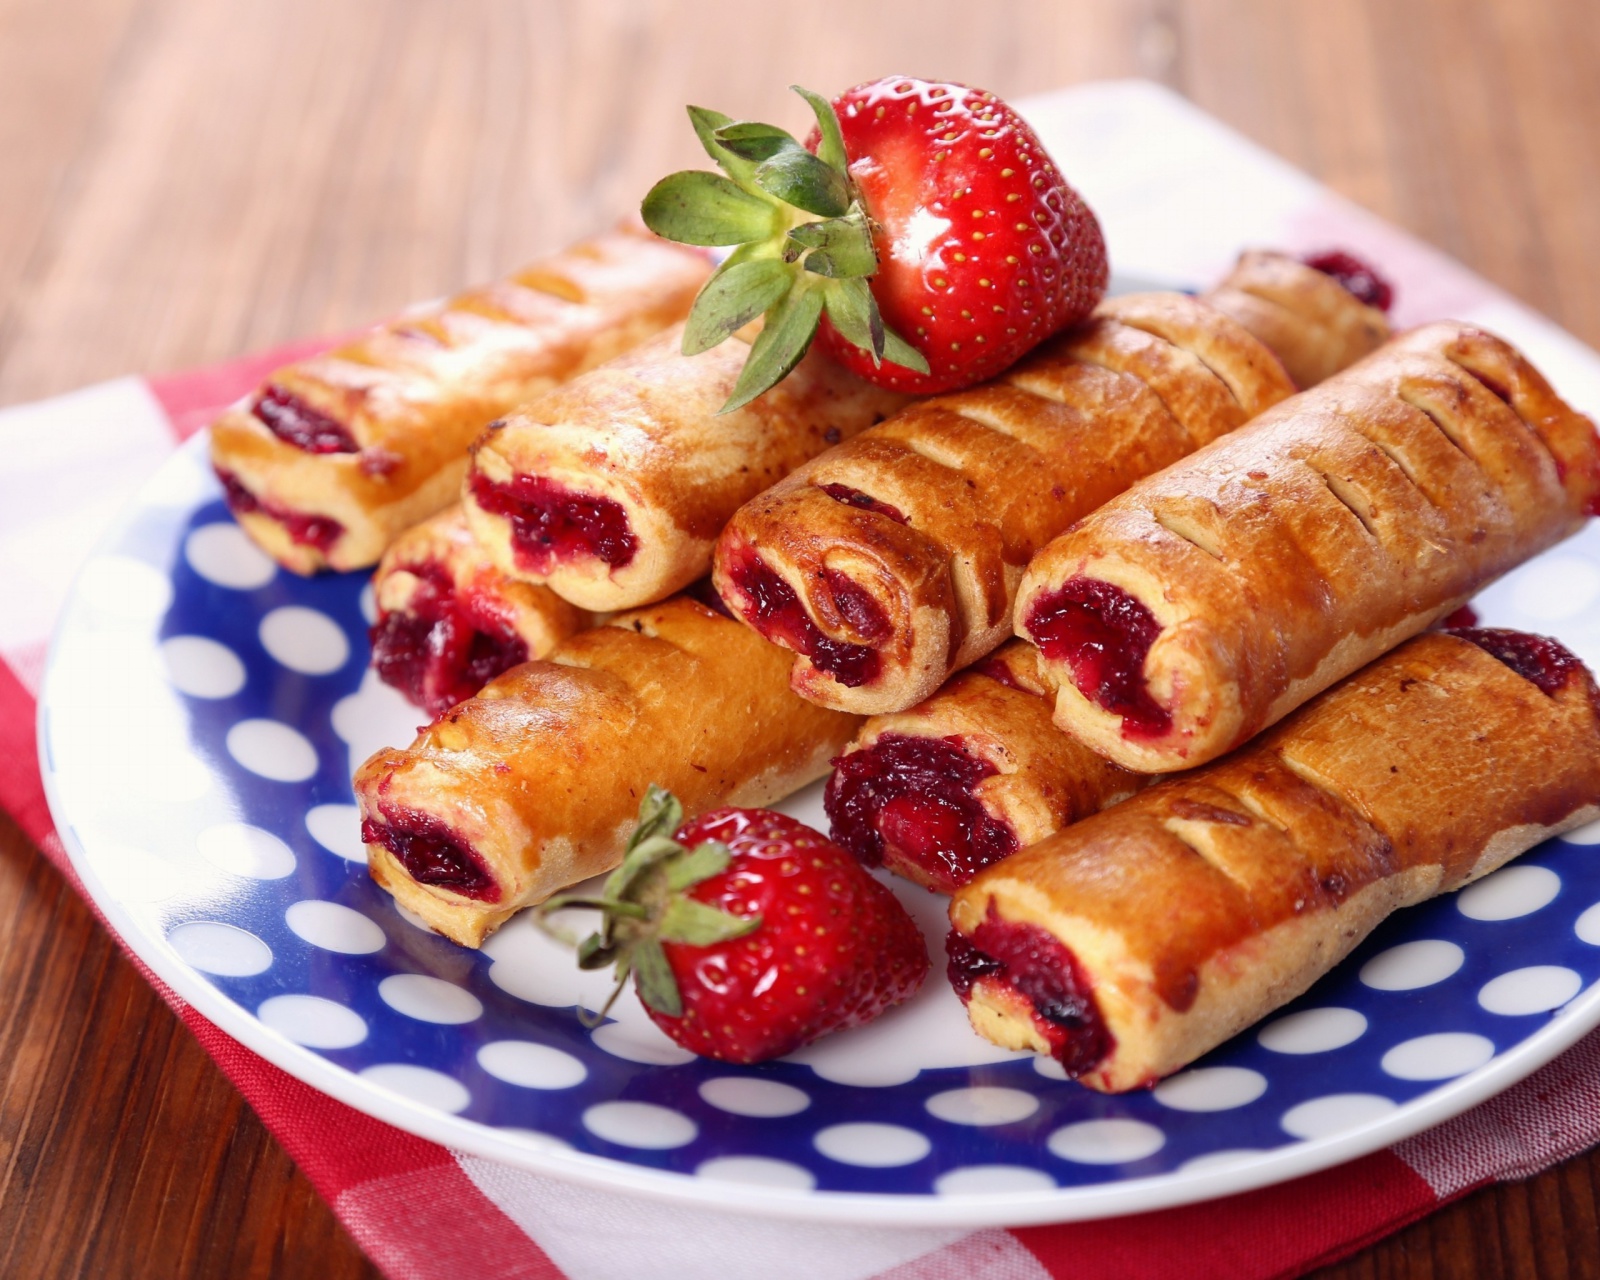 Pastry with Jam wallpaper 1600x1280